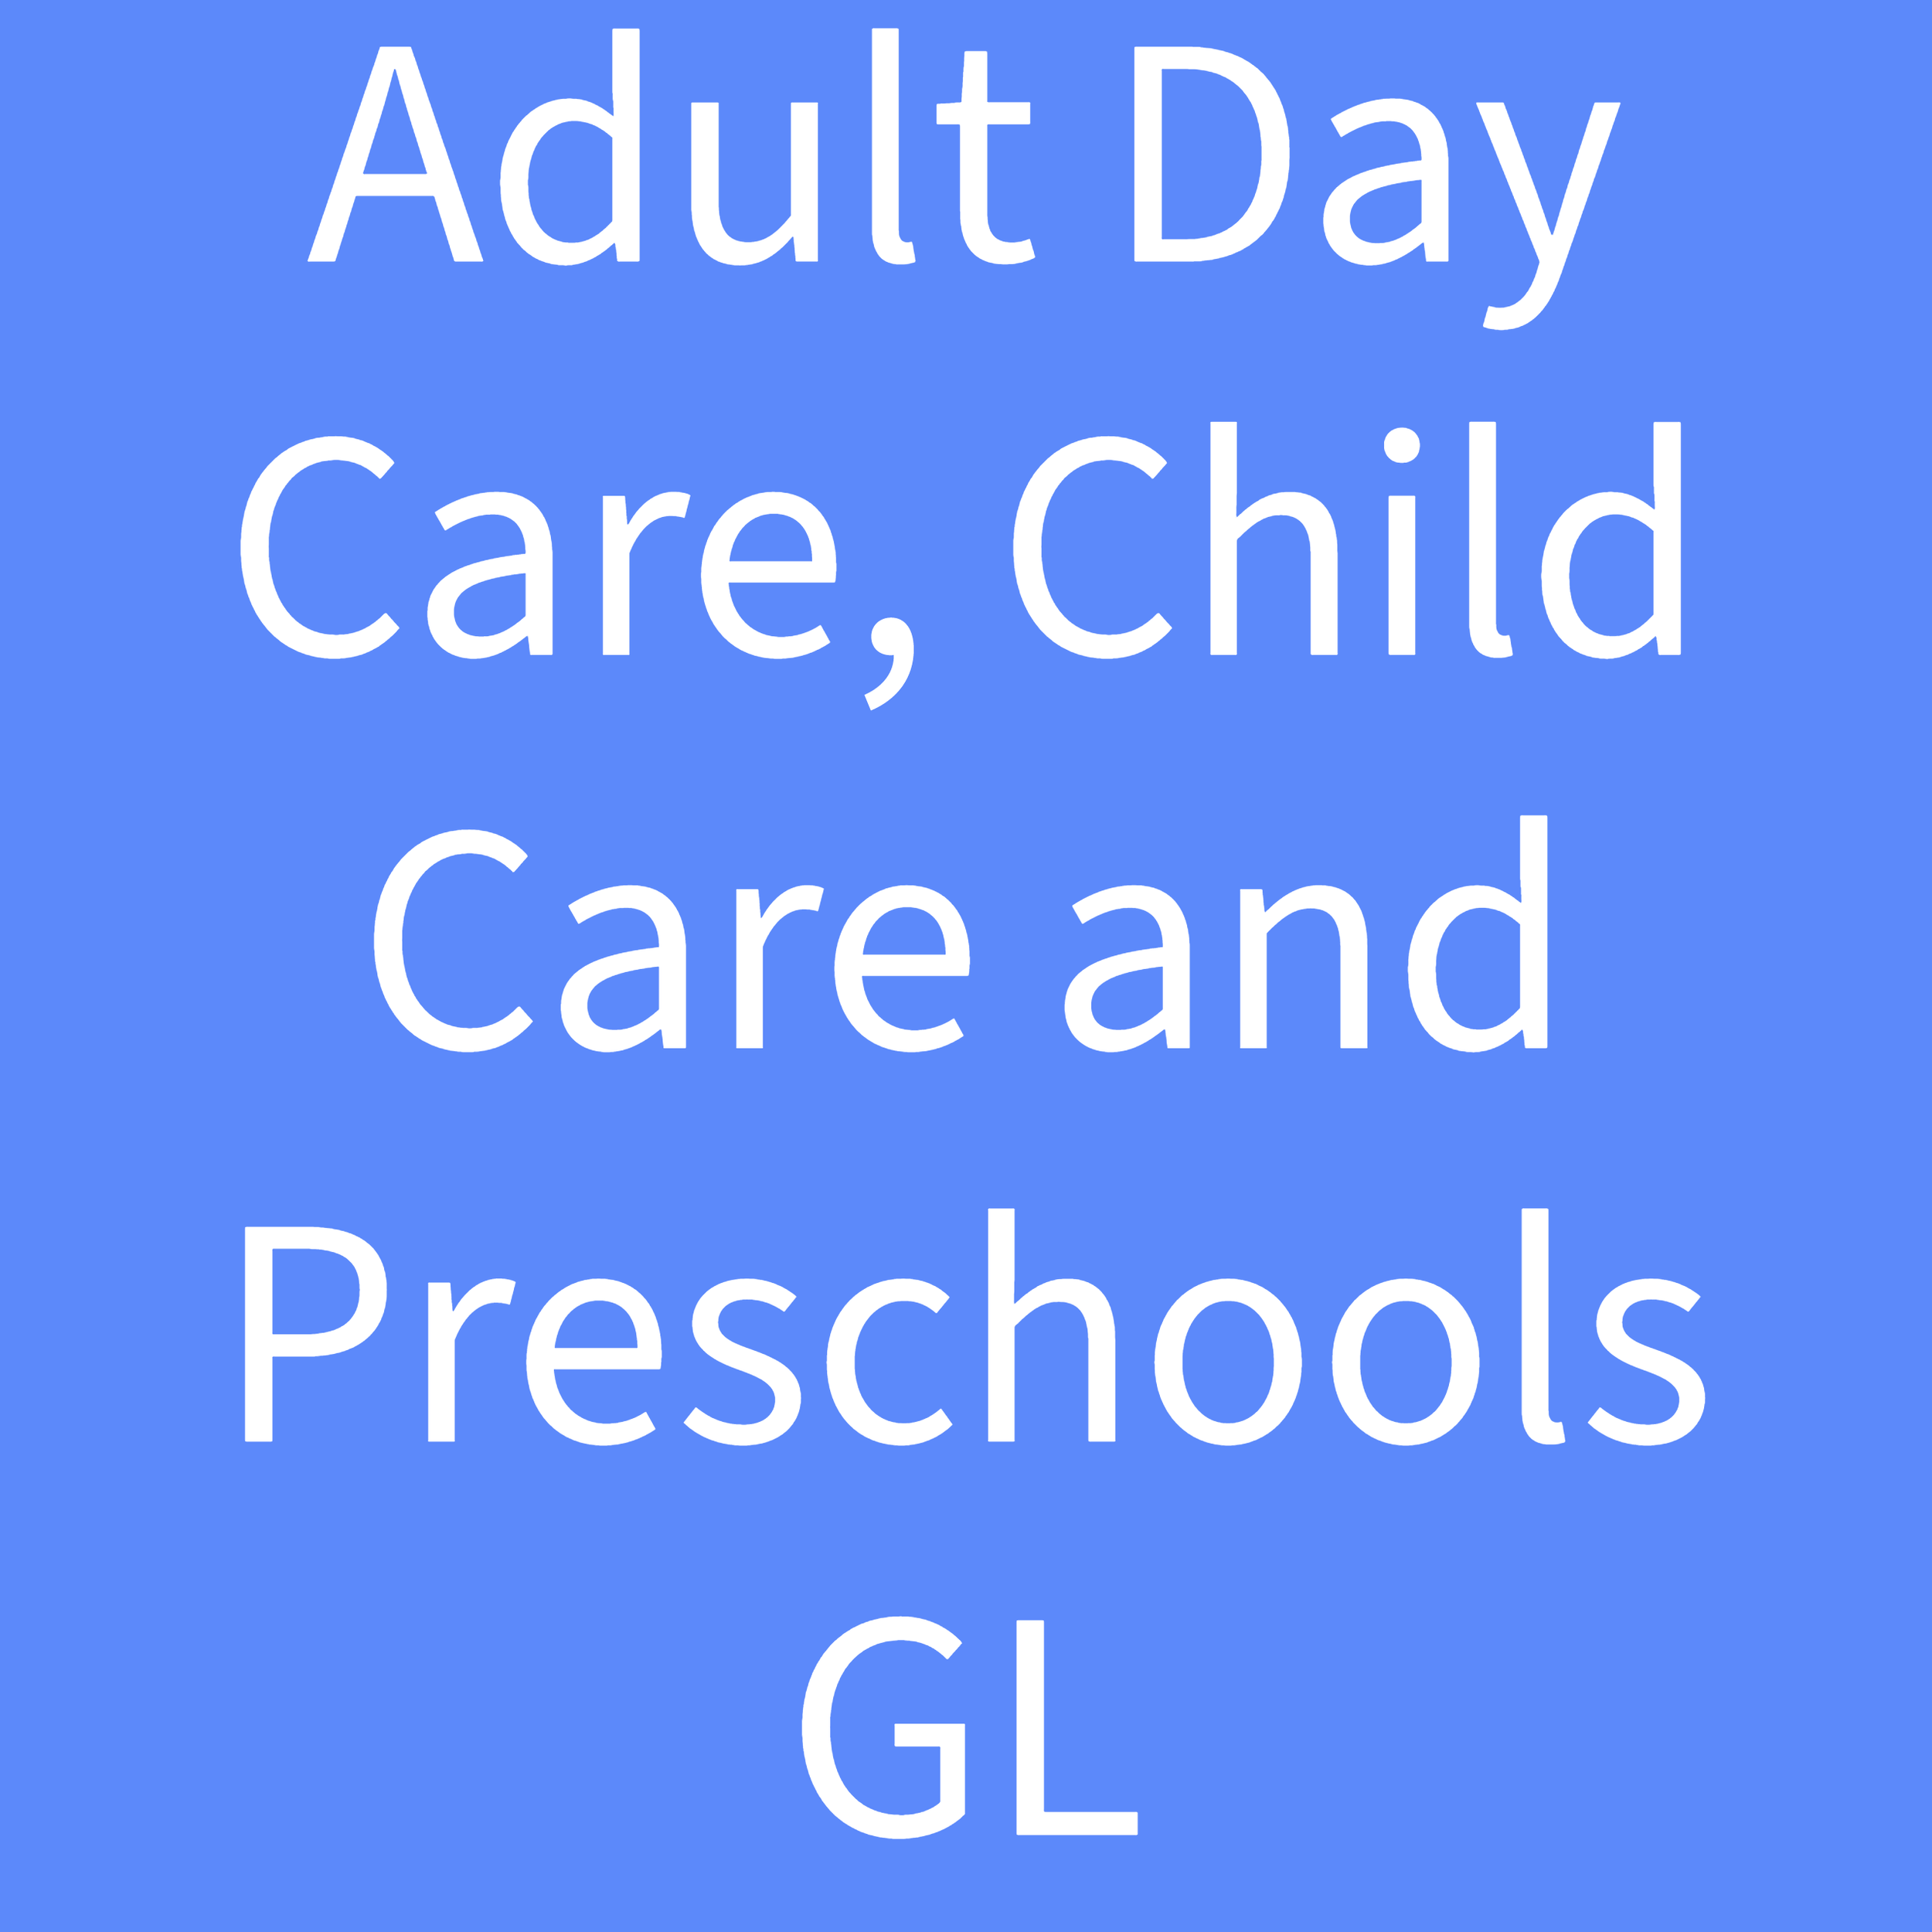 Adult Day Care, Child Care and Preschools GL 